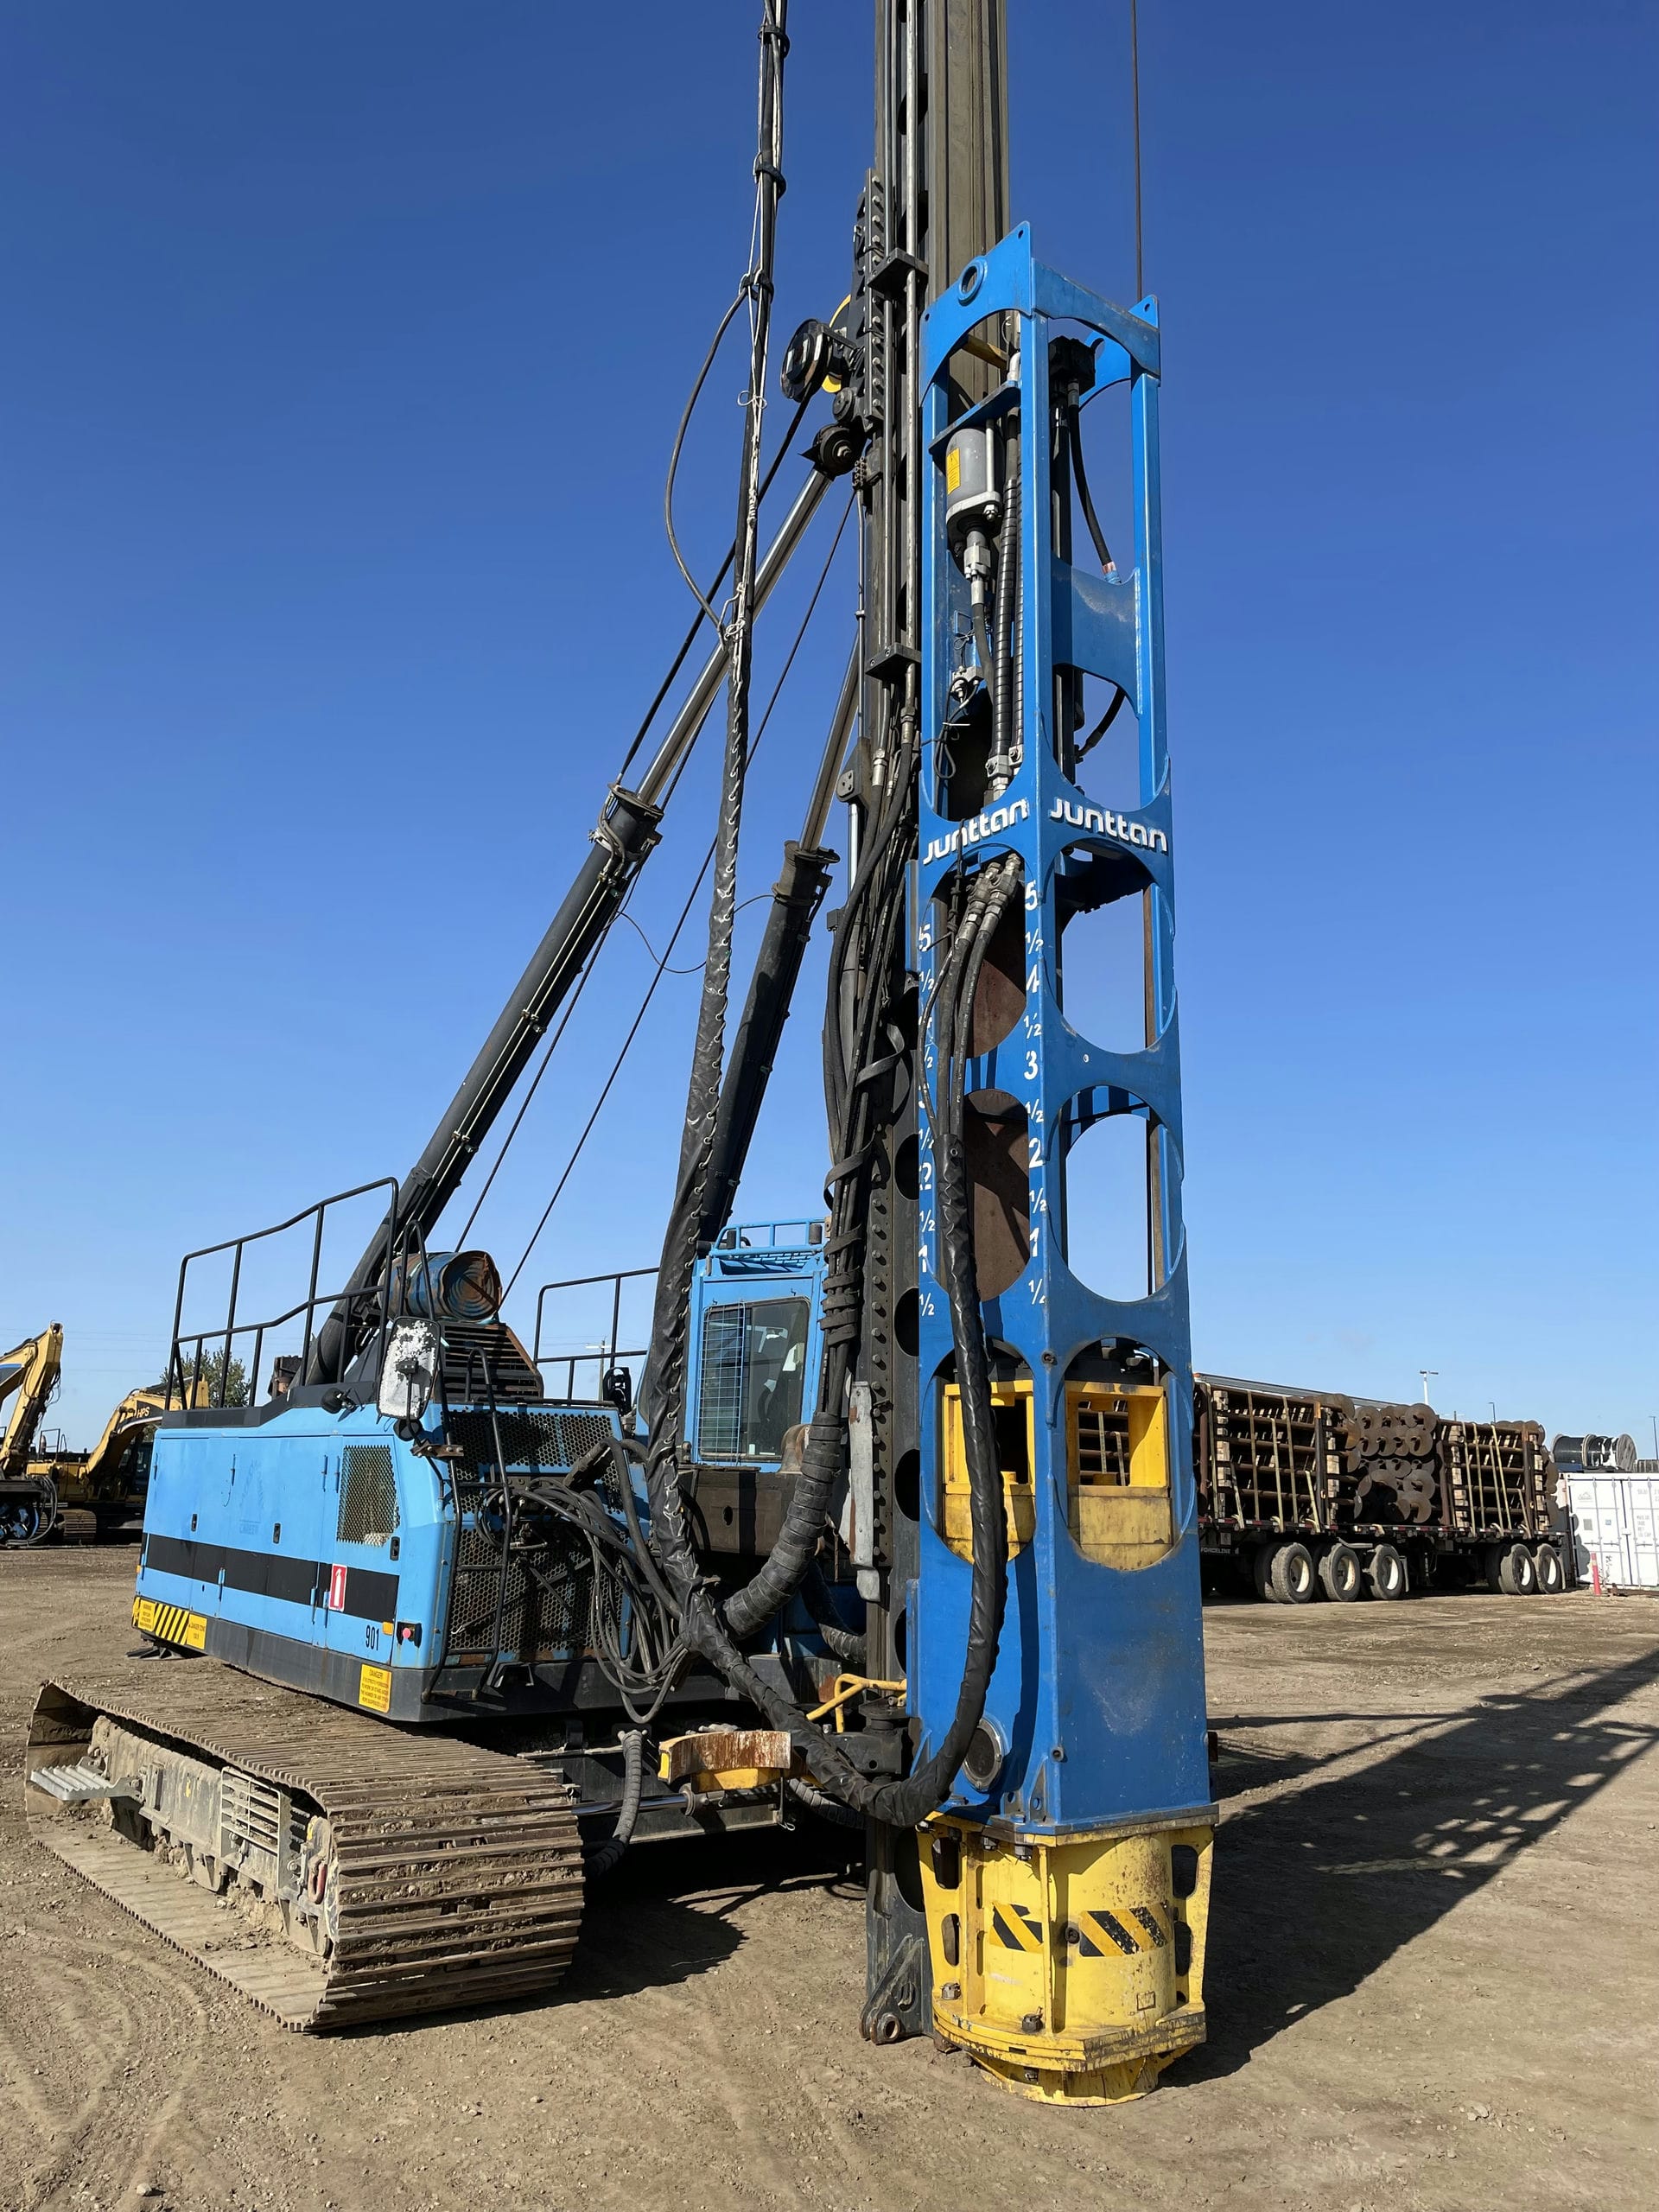 A blue drill rig on a dirt field, ready for work.